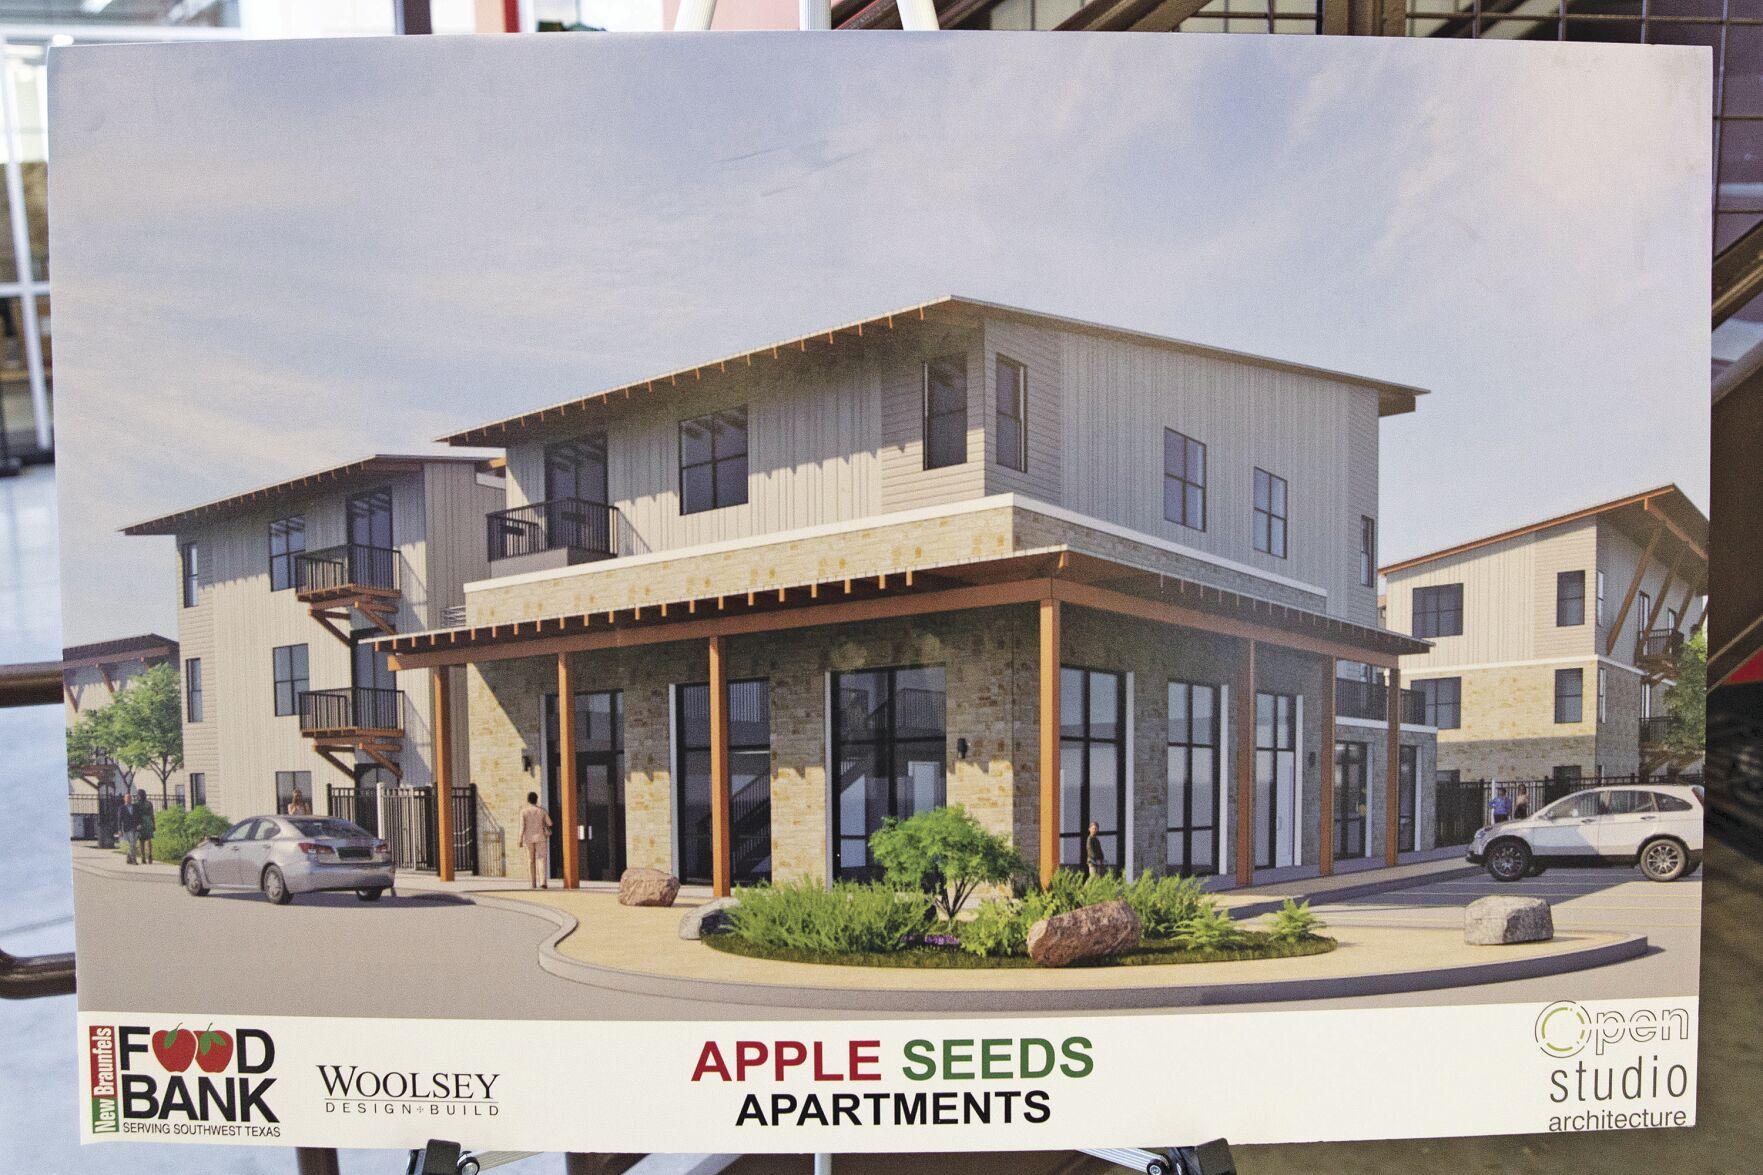 New Braunfels Food Bank, city working on 51unit apartment project